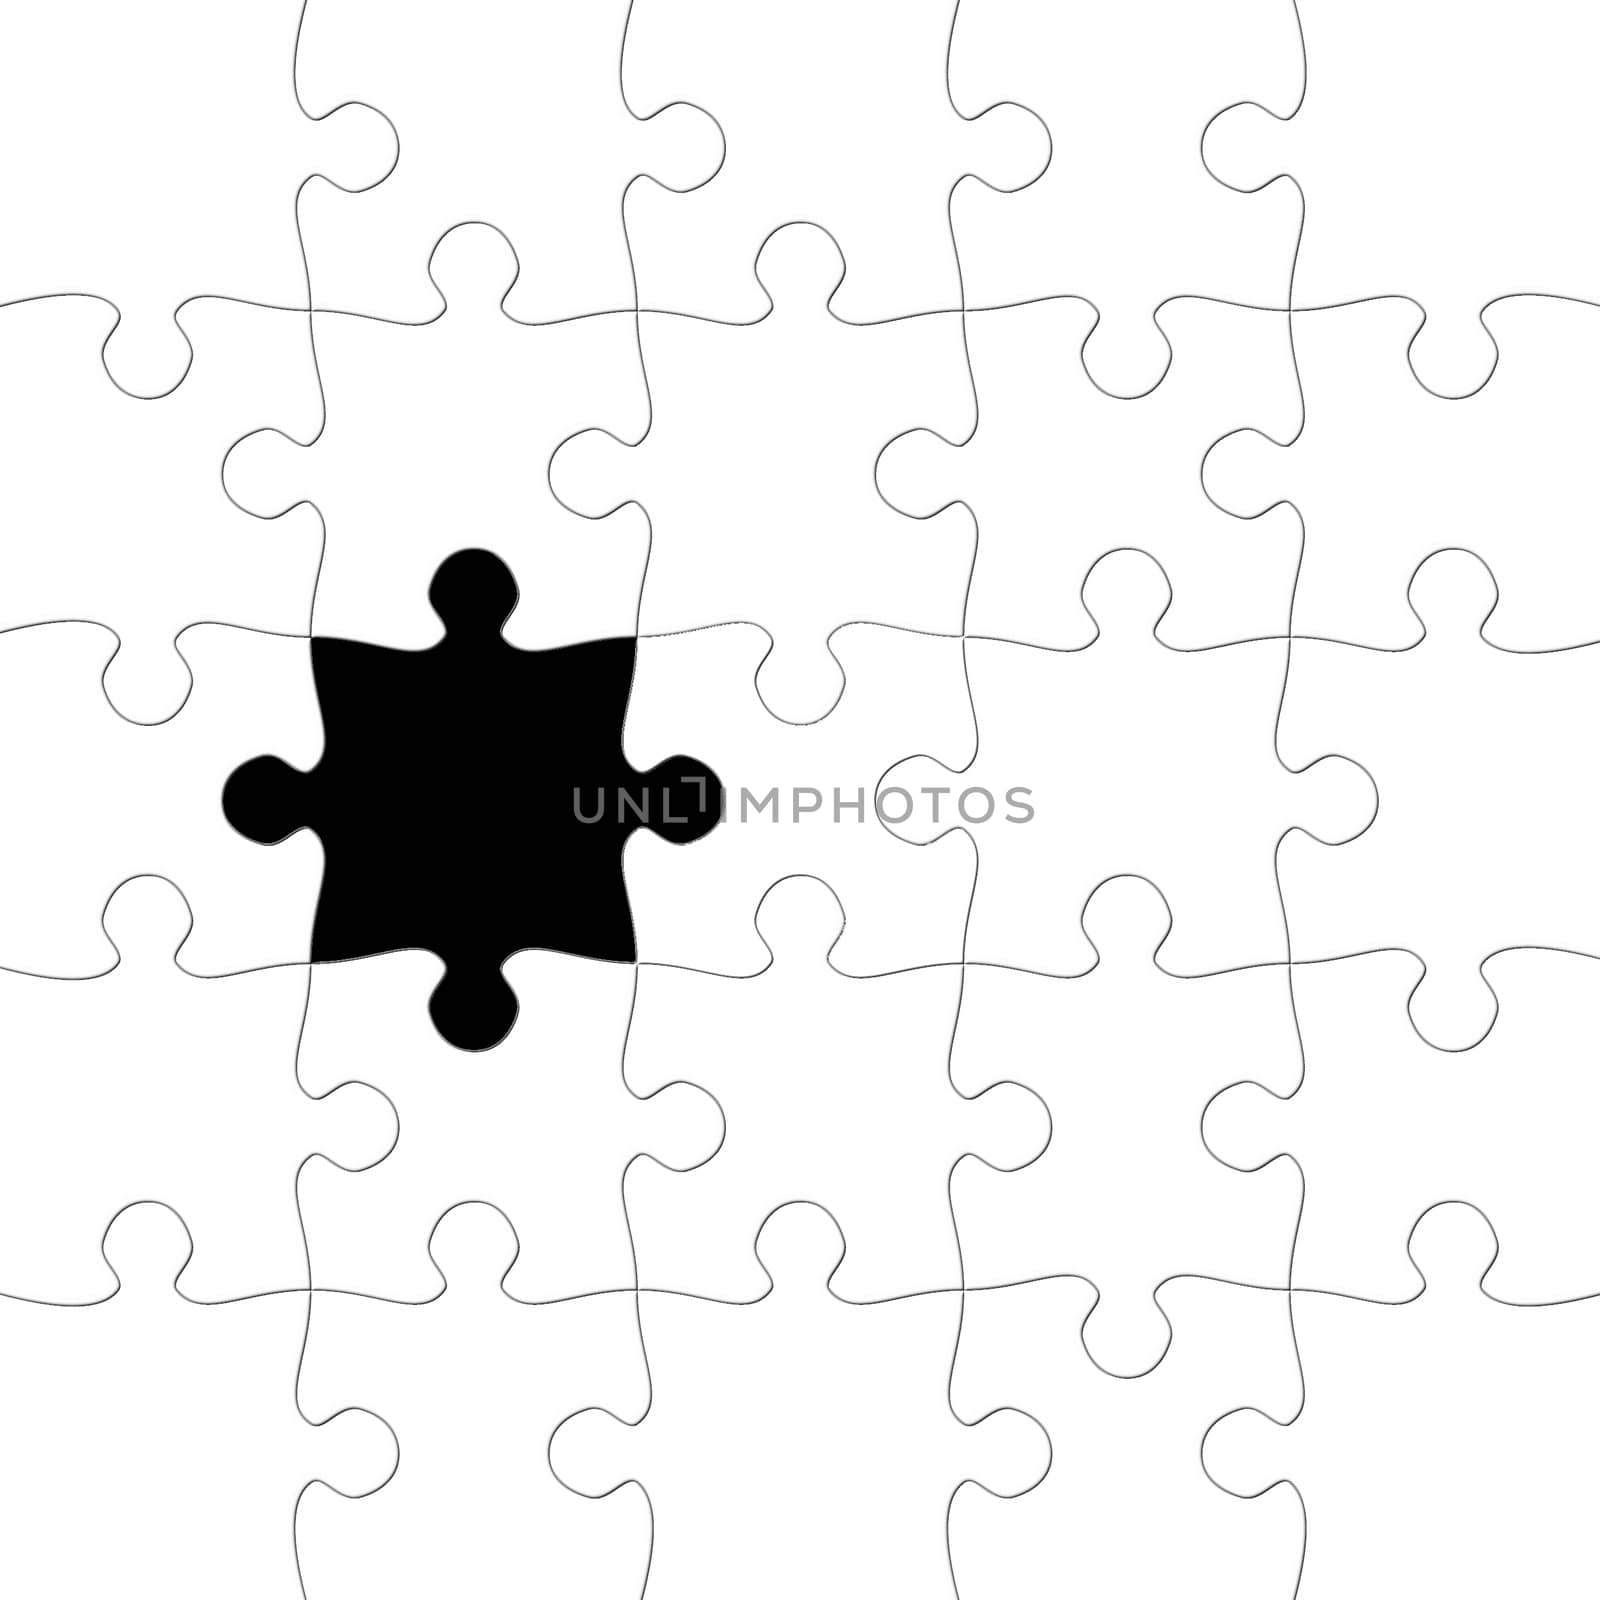 Puzzle with missing piece in black by Georgios